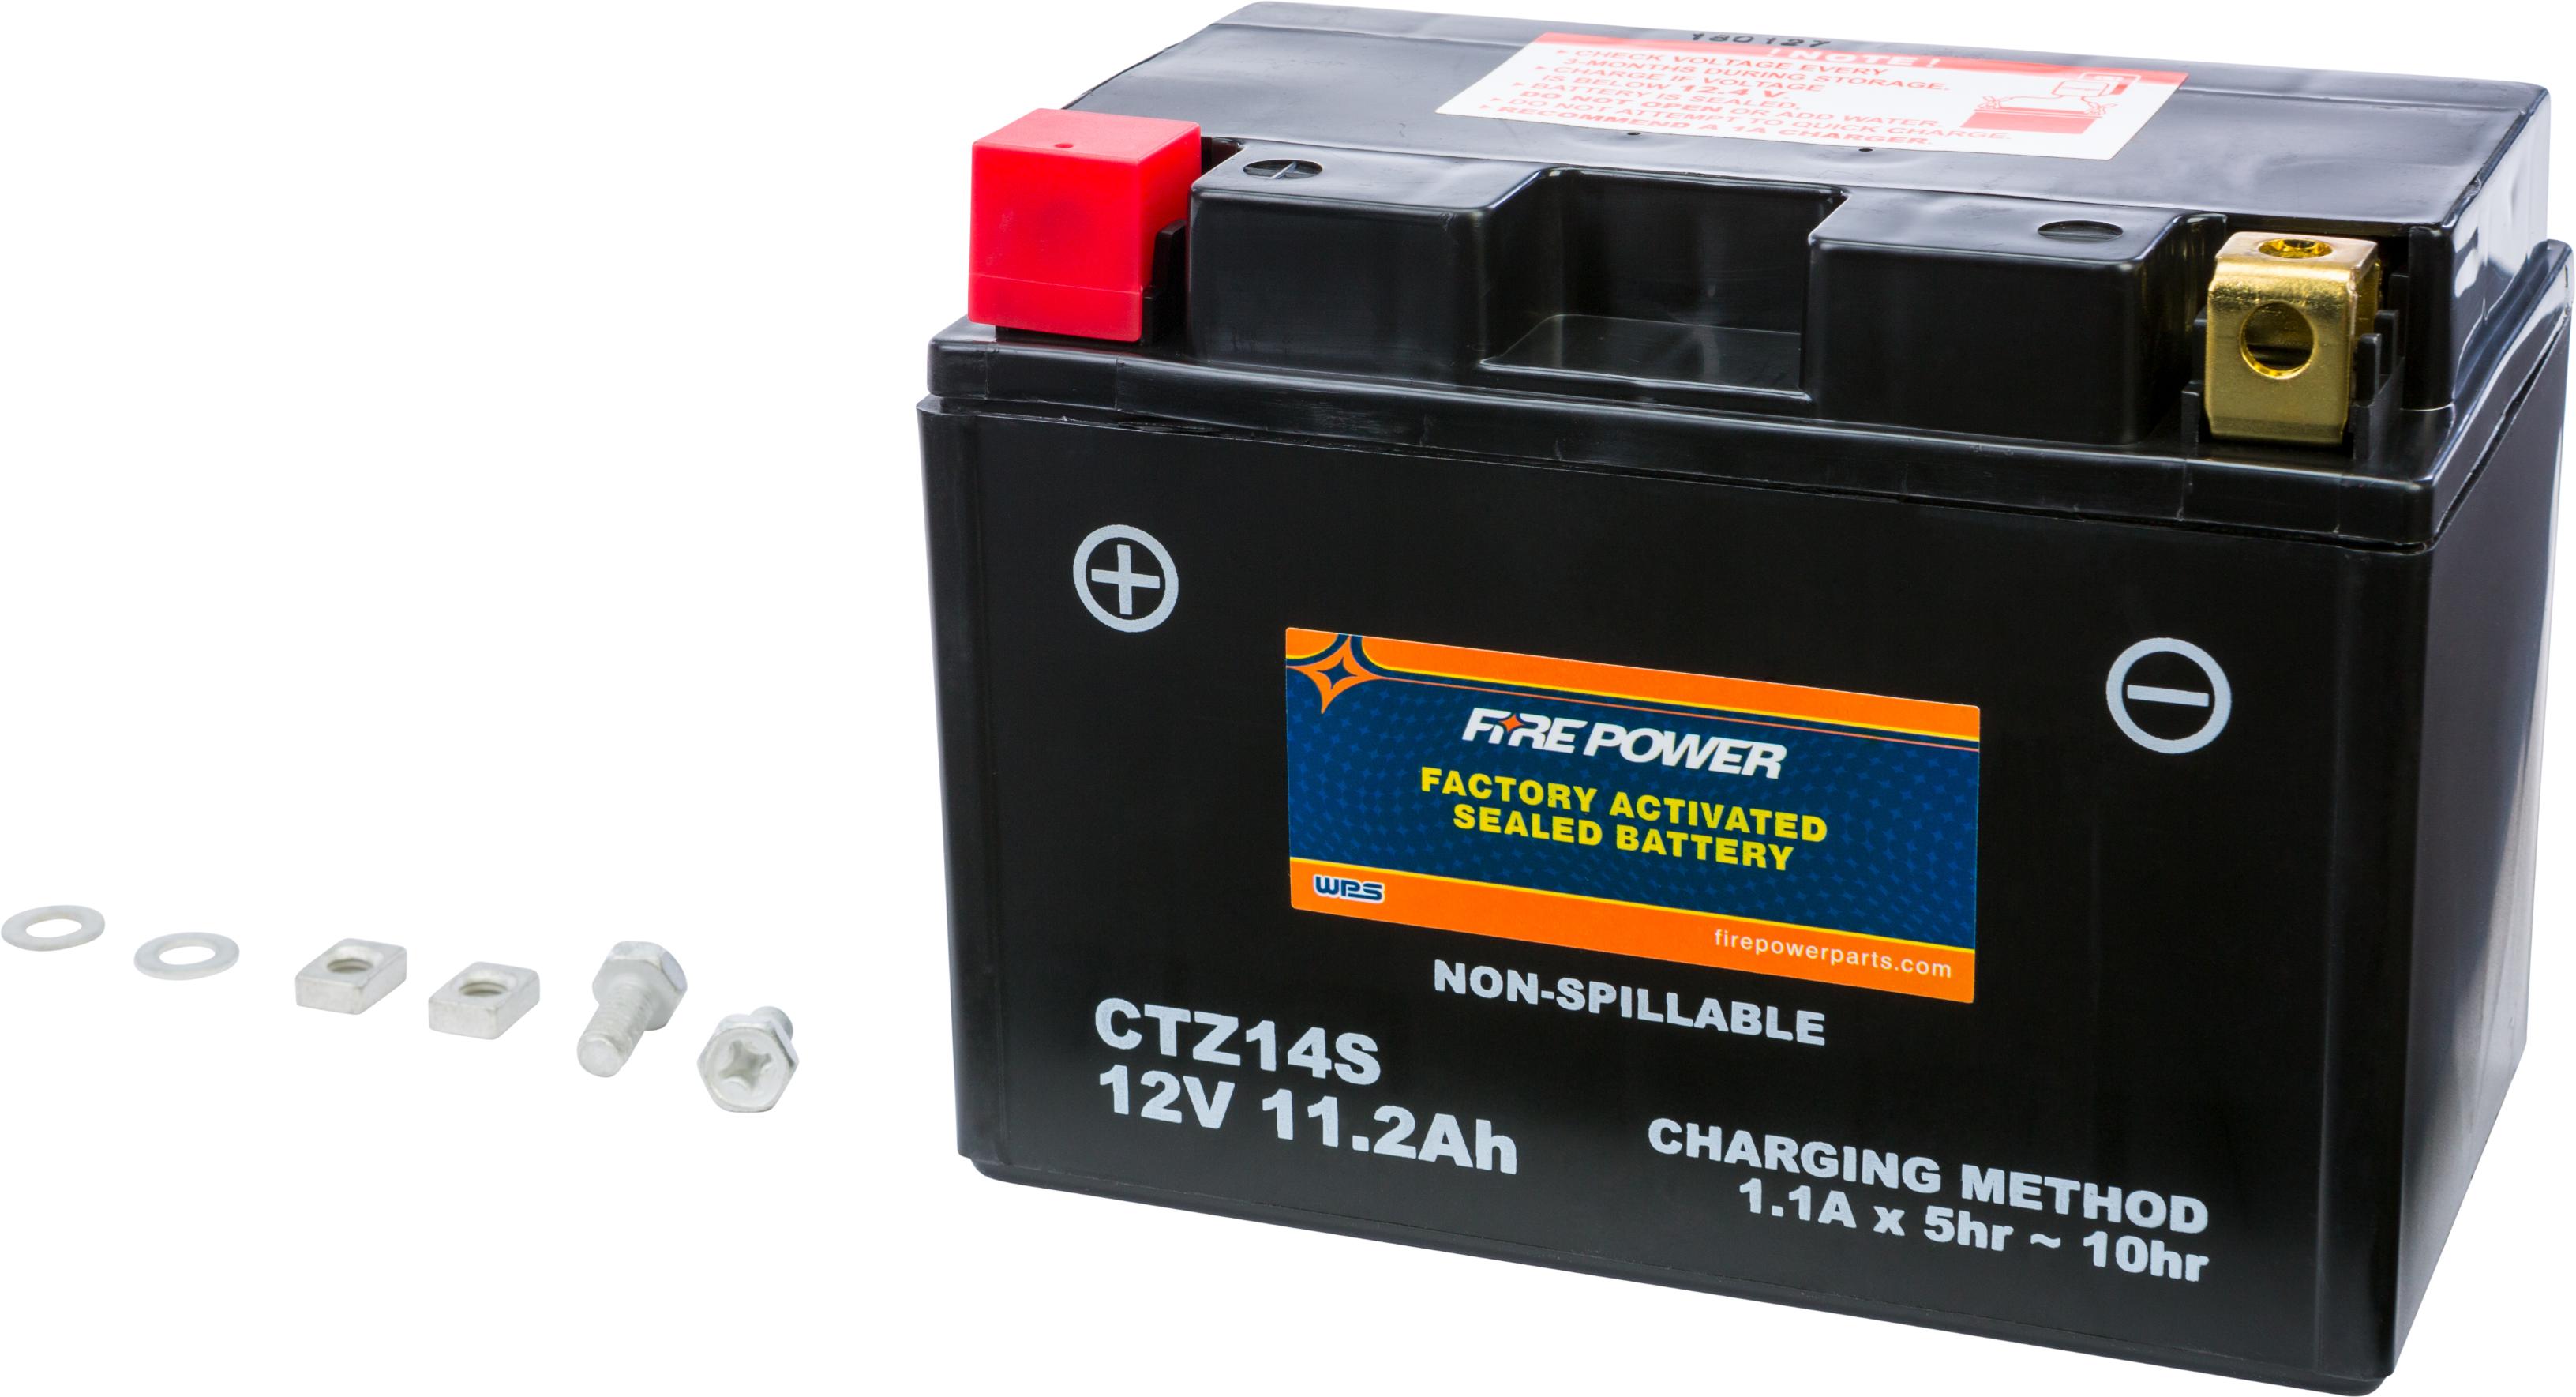 Fire Power - Battery Ctz14s Sealed Factory Activated - CTZ14S